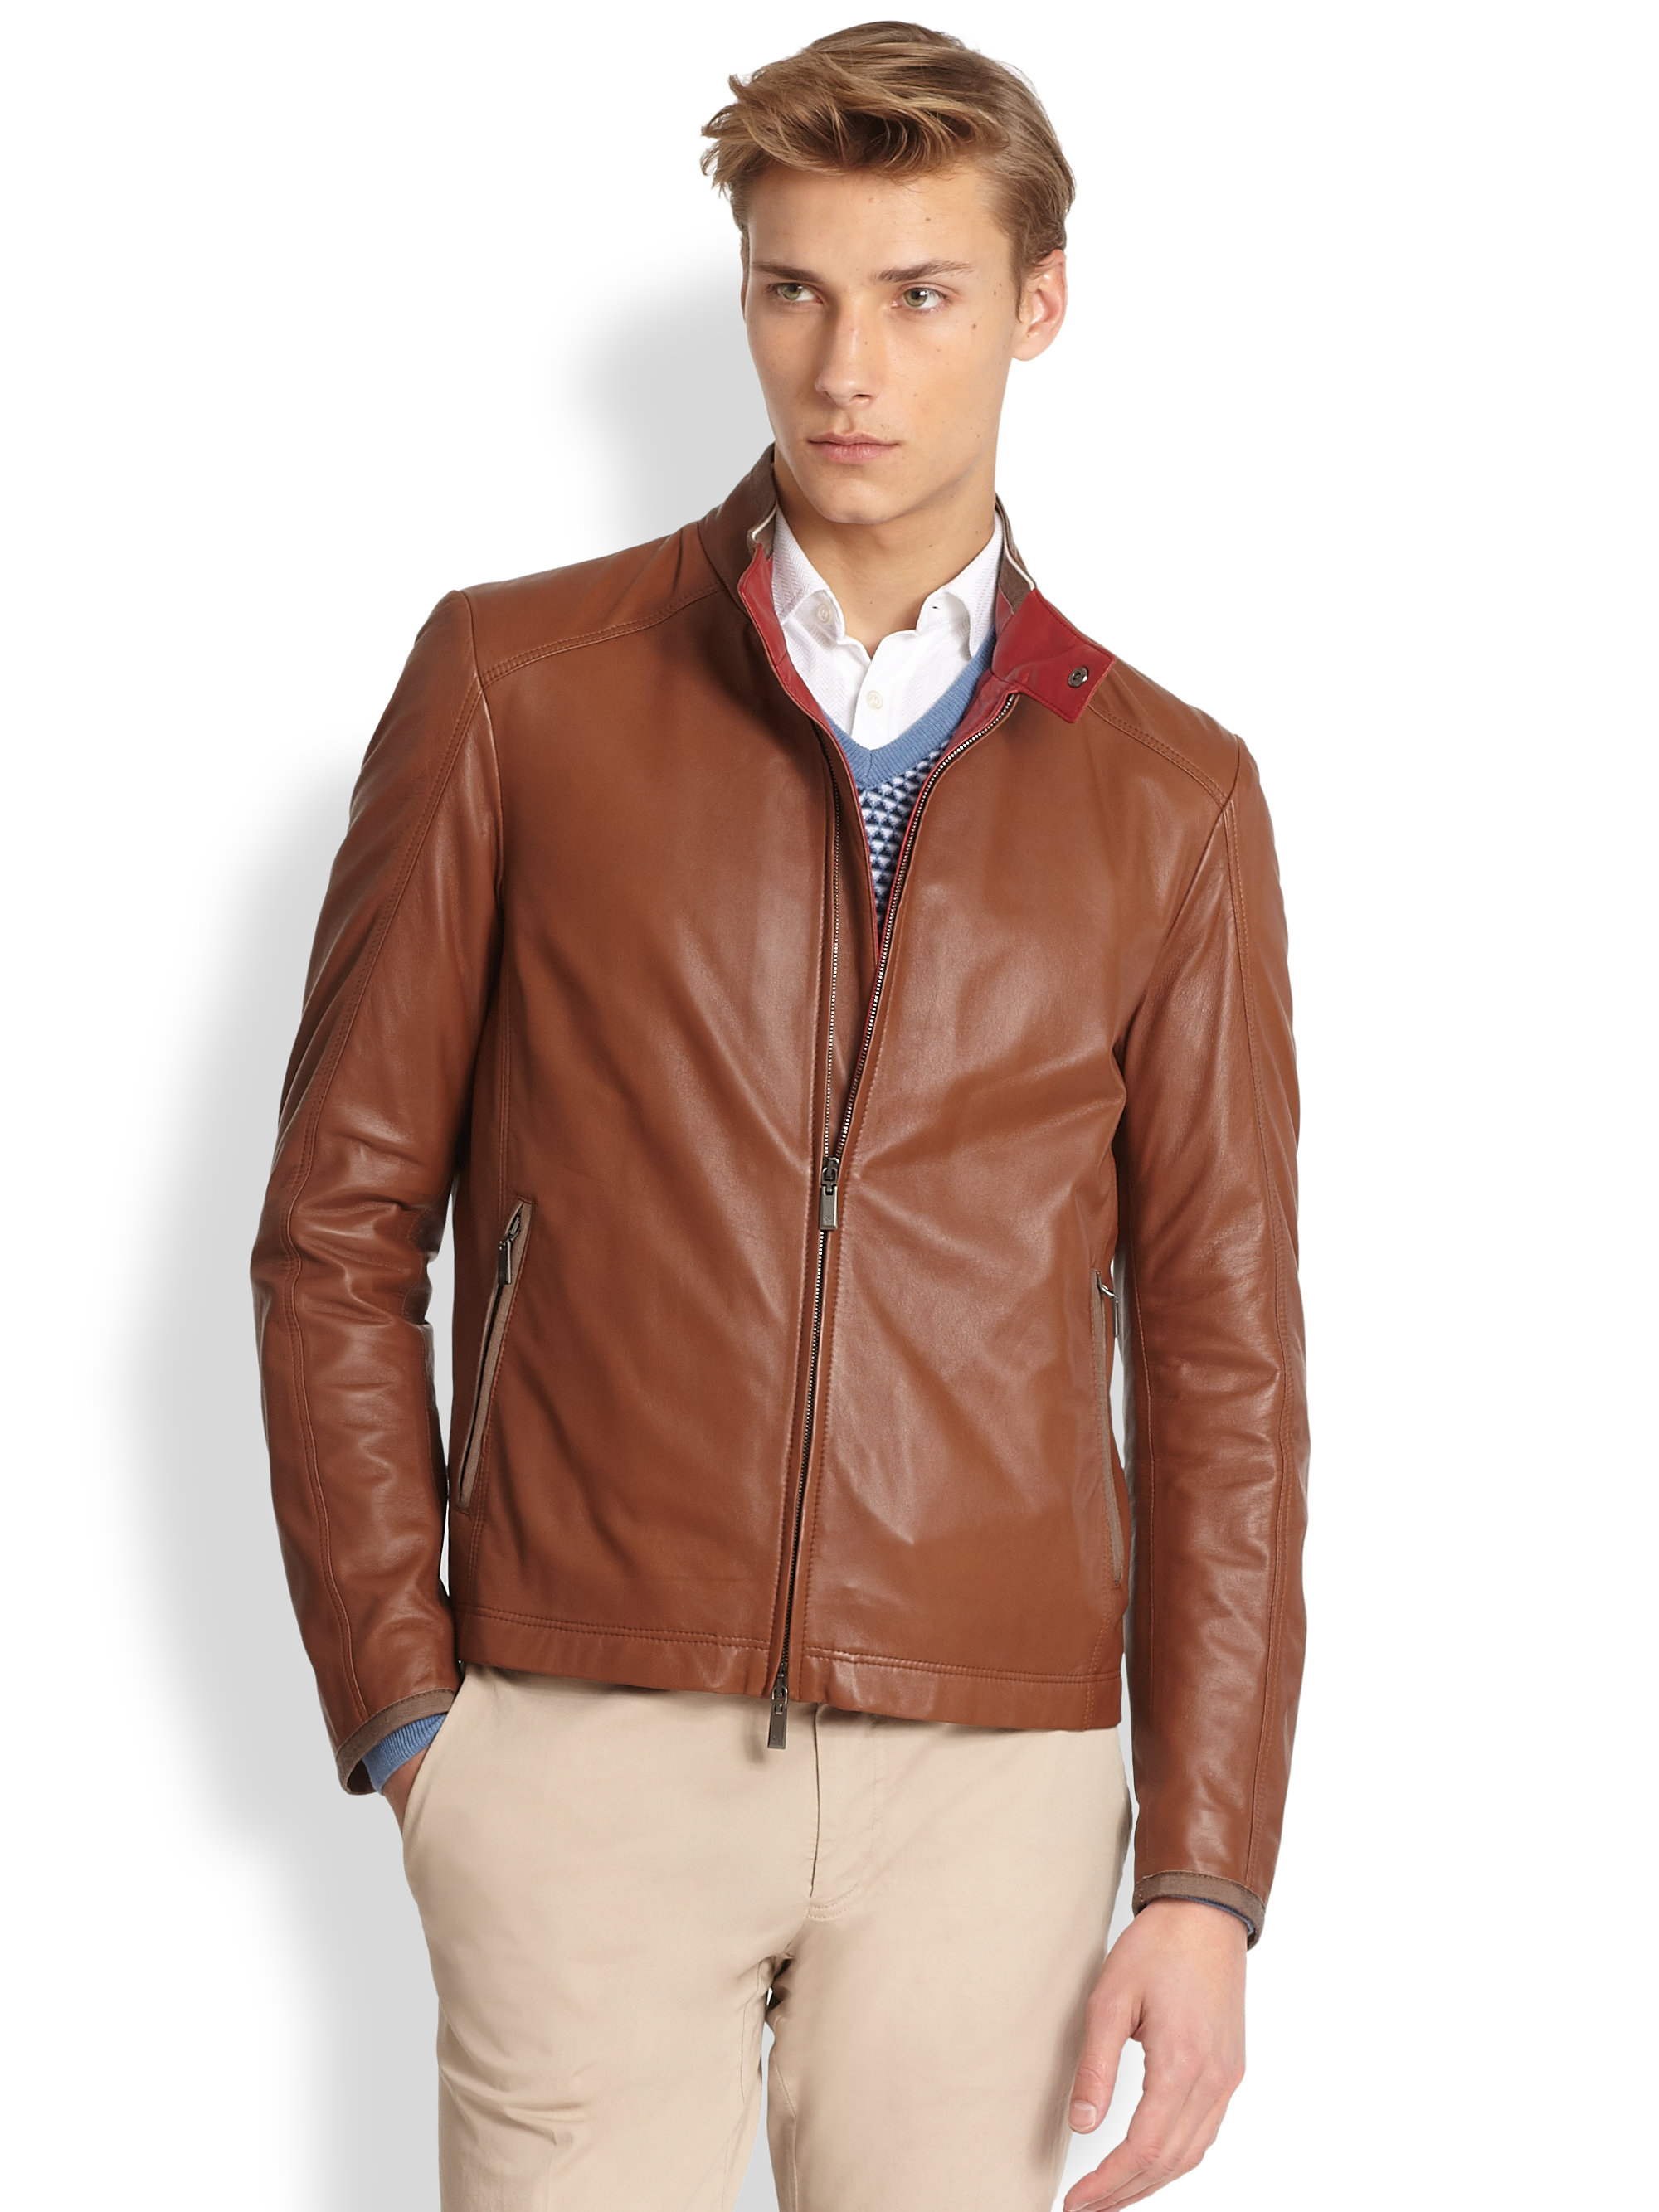 Canali Leather Jacket in Brown for Men - Lyst